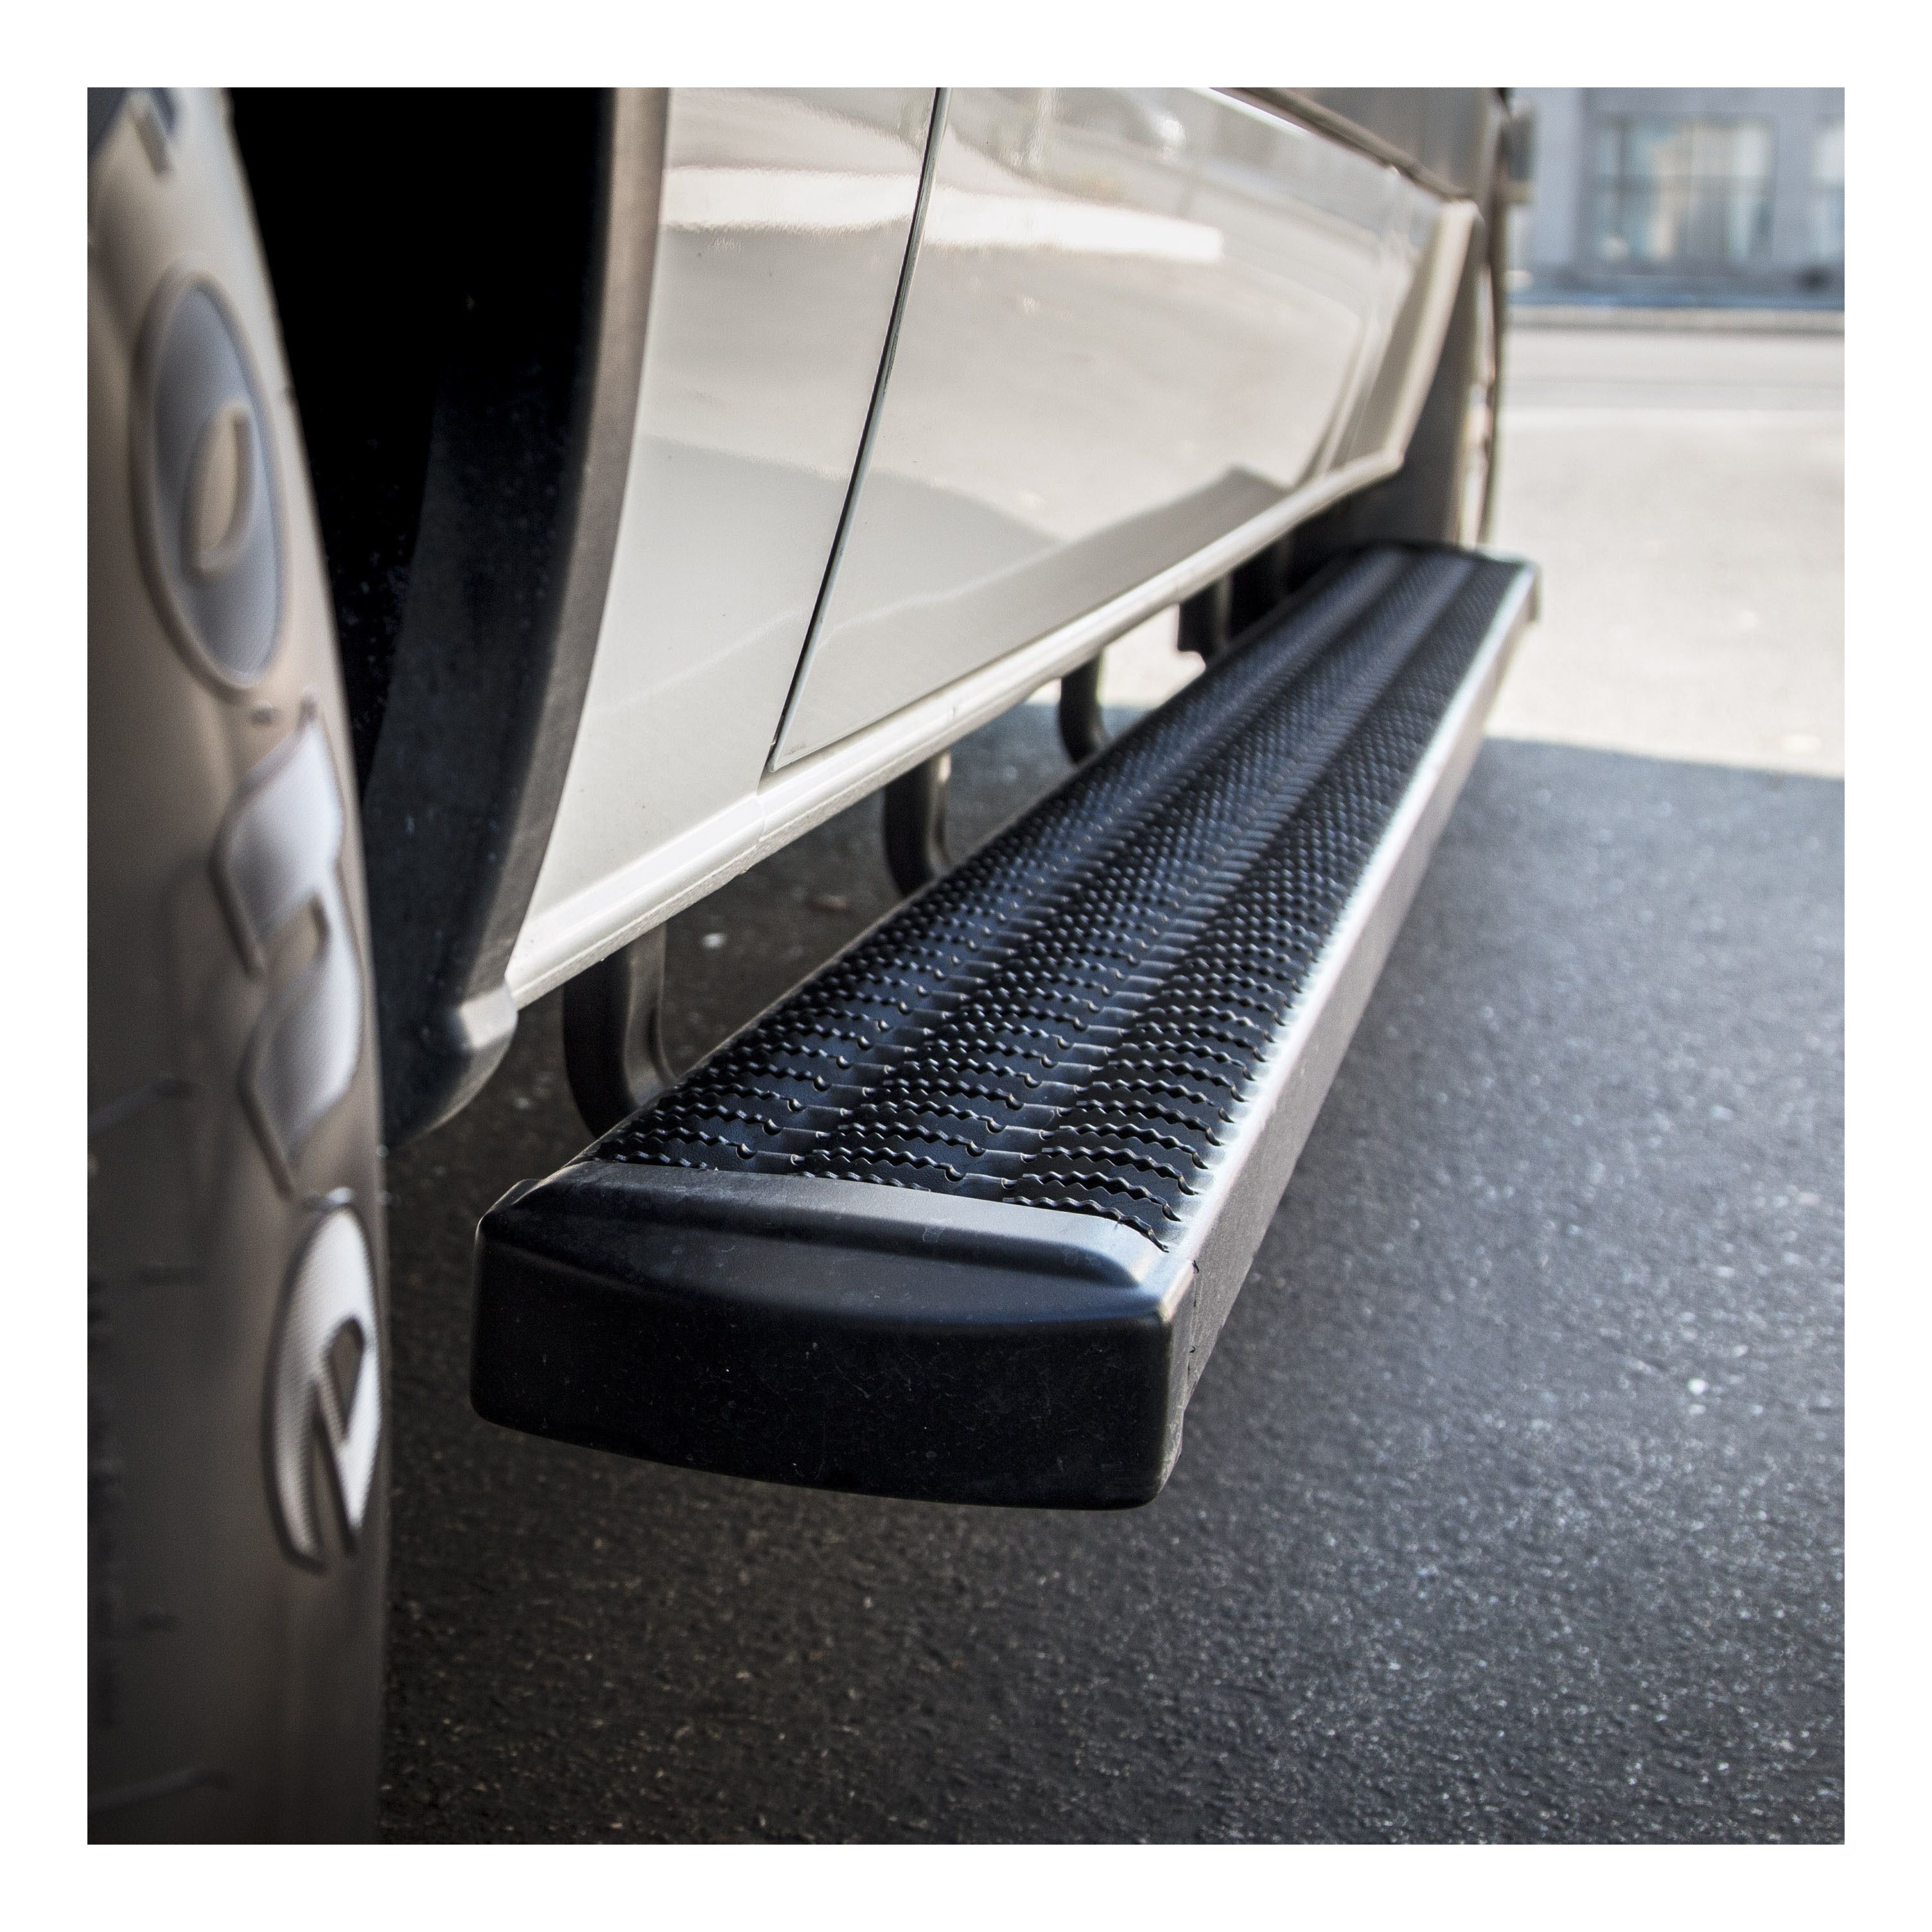 2014-2018 Chevrolet Silverado 1500 Double Cab Grip Step 7" Running Boards Black Textured Luverne Running Boards For A 2014 Chevy Silverado